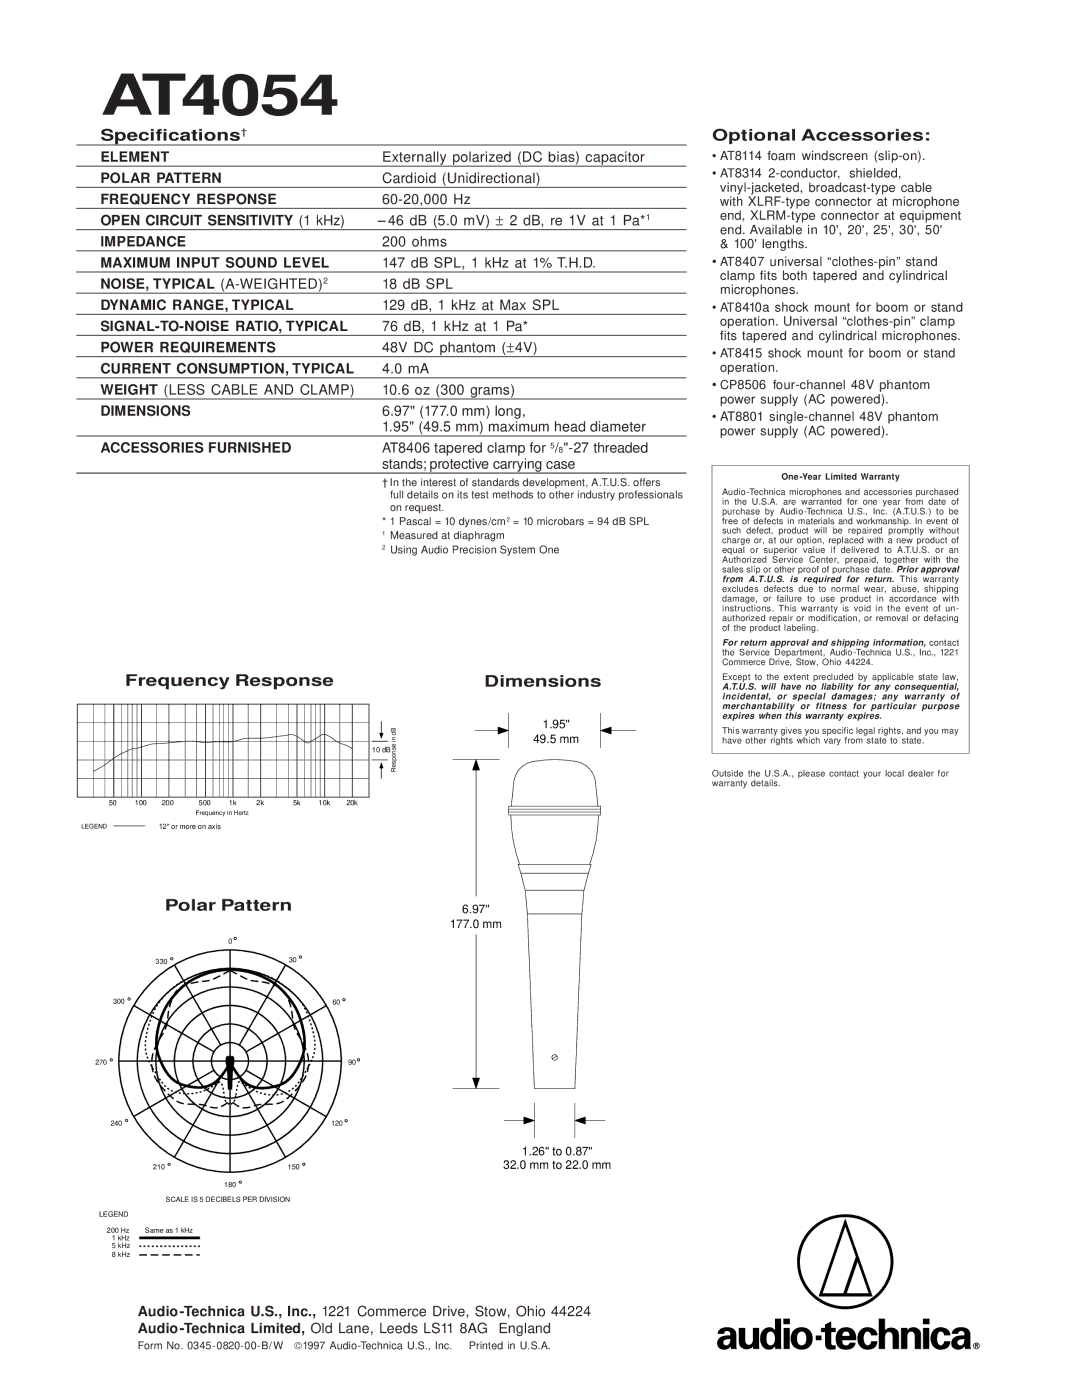 Audio-Technica AT4054 specifications Specifications†, Frequency Response Dimensions, Optional Accessories, Polar Pattern 